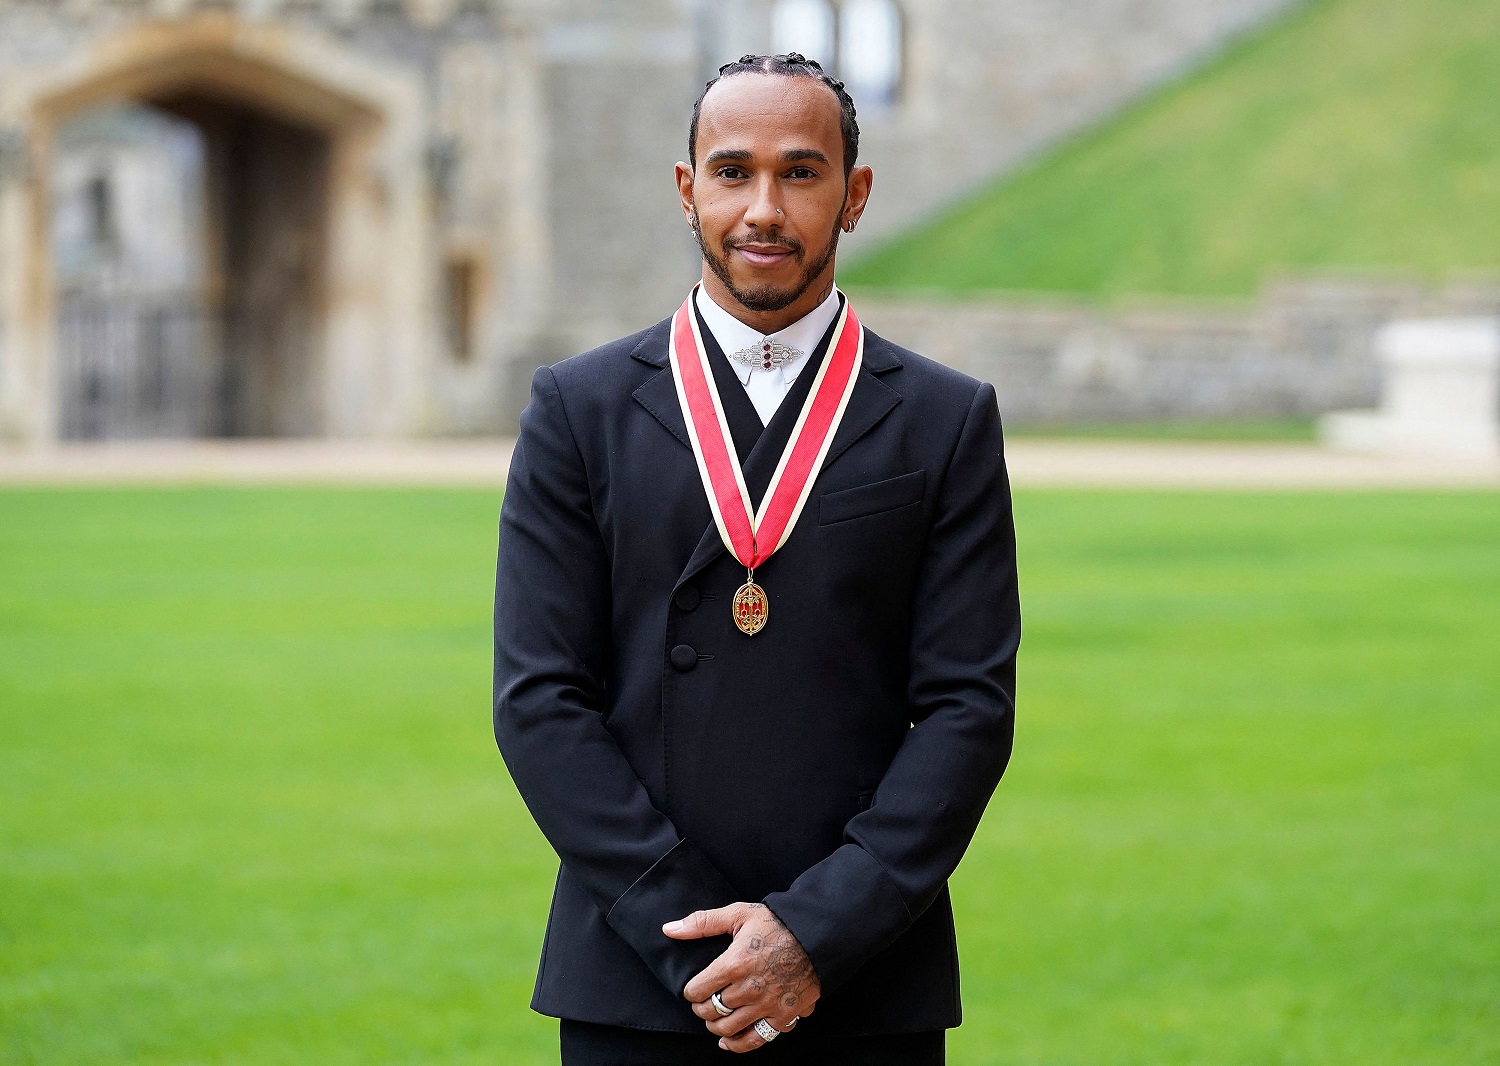 Lewis Hamilton poses with his medal after being appointed as a Knight Bachelor for services to motorsports by Prince Charles at Windsor Castle on Dec. 15, 2021. | Andrew Matthews / Pool / AFP / Getty Images